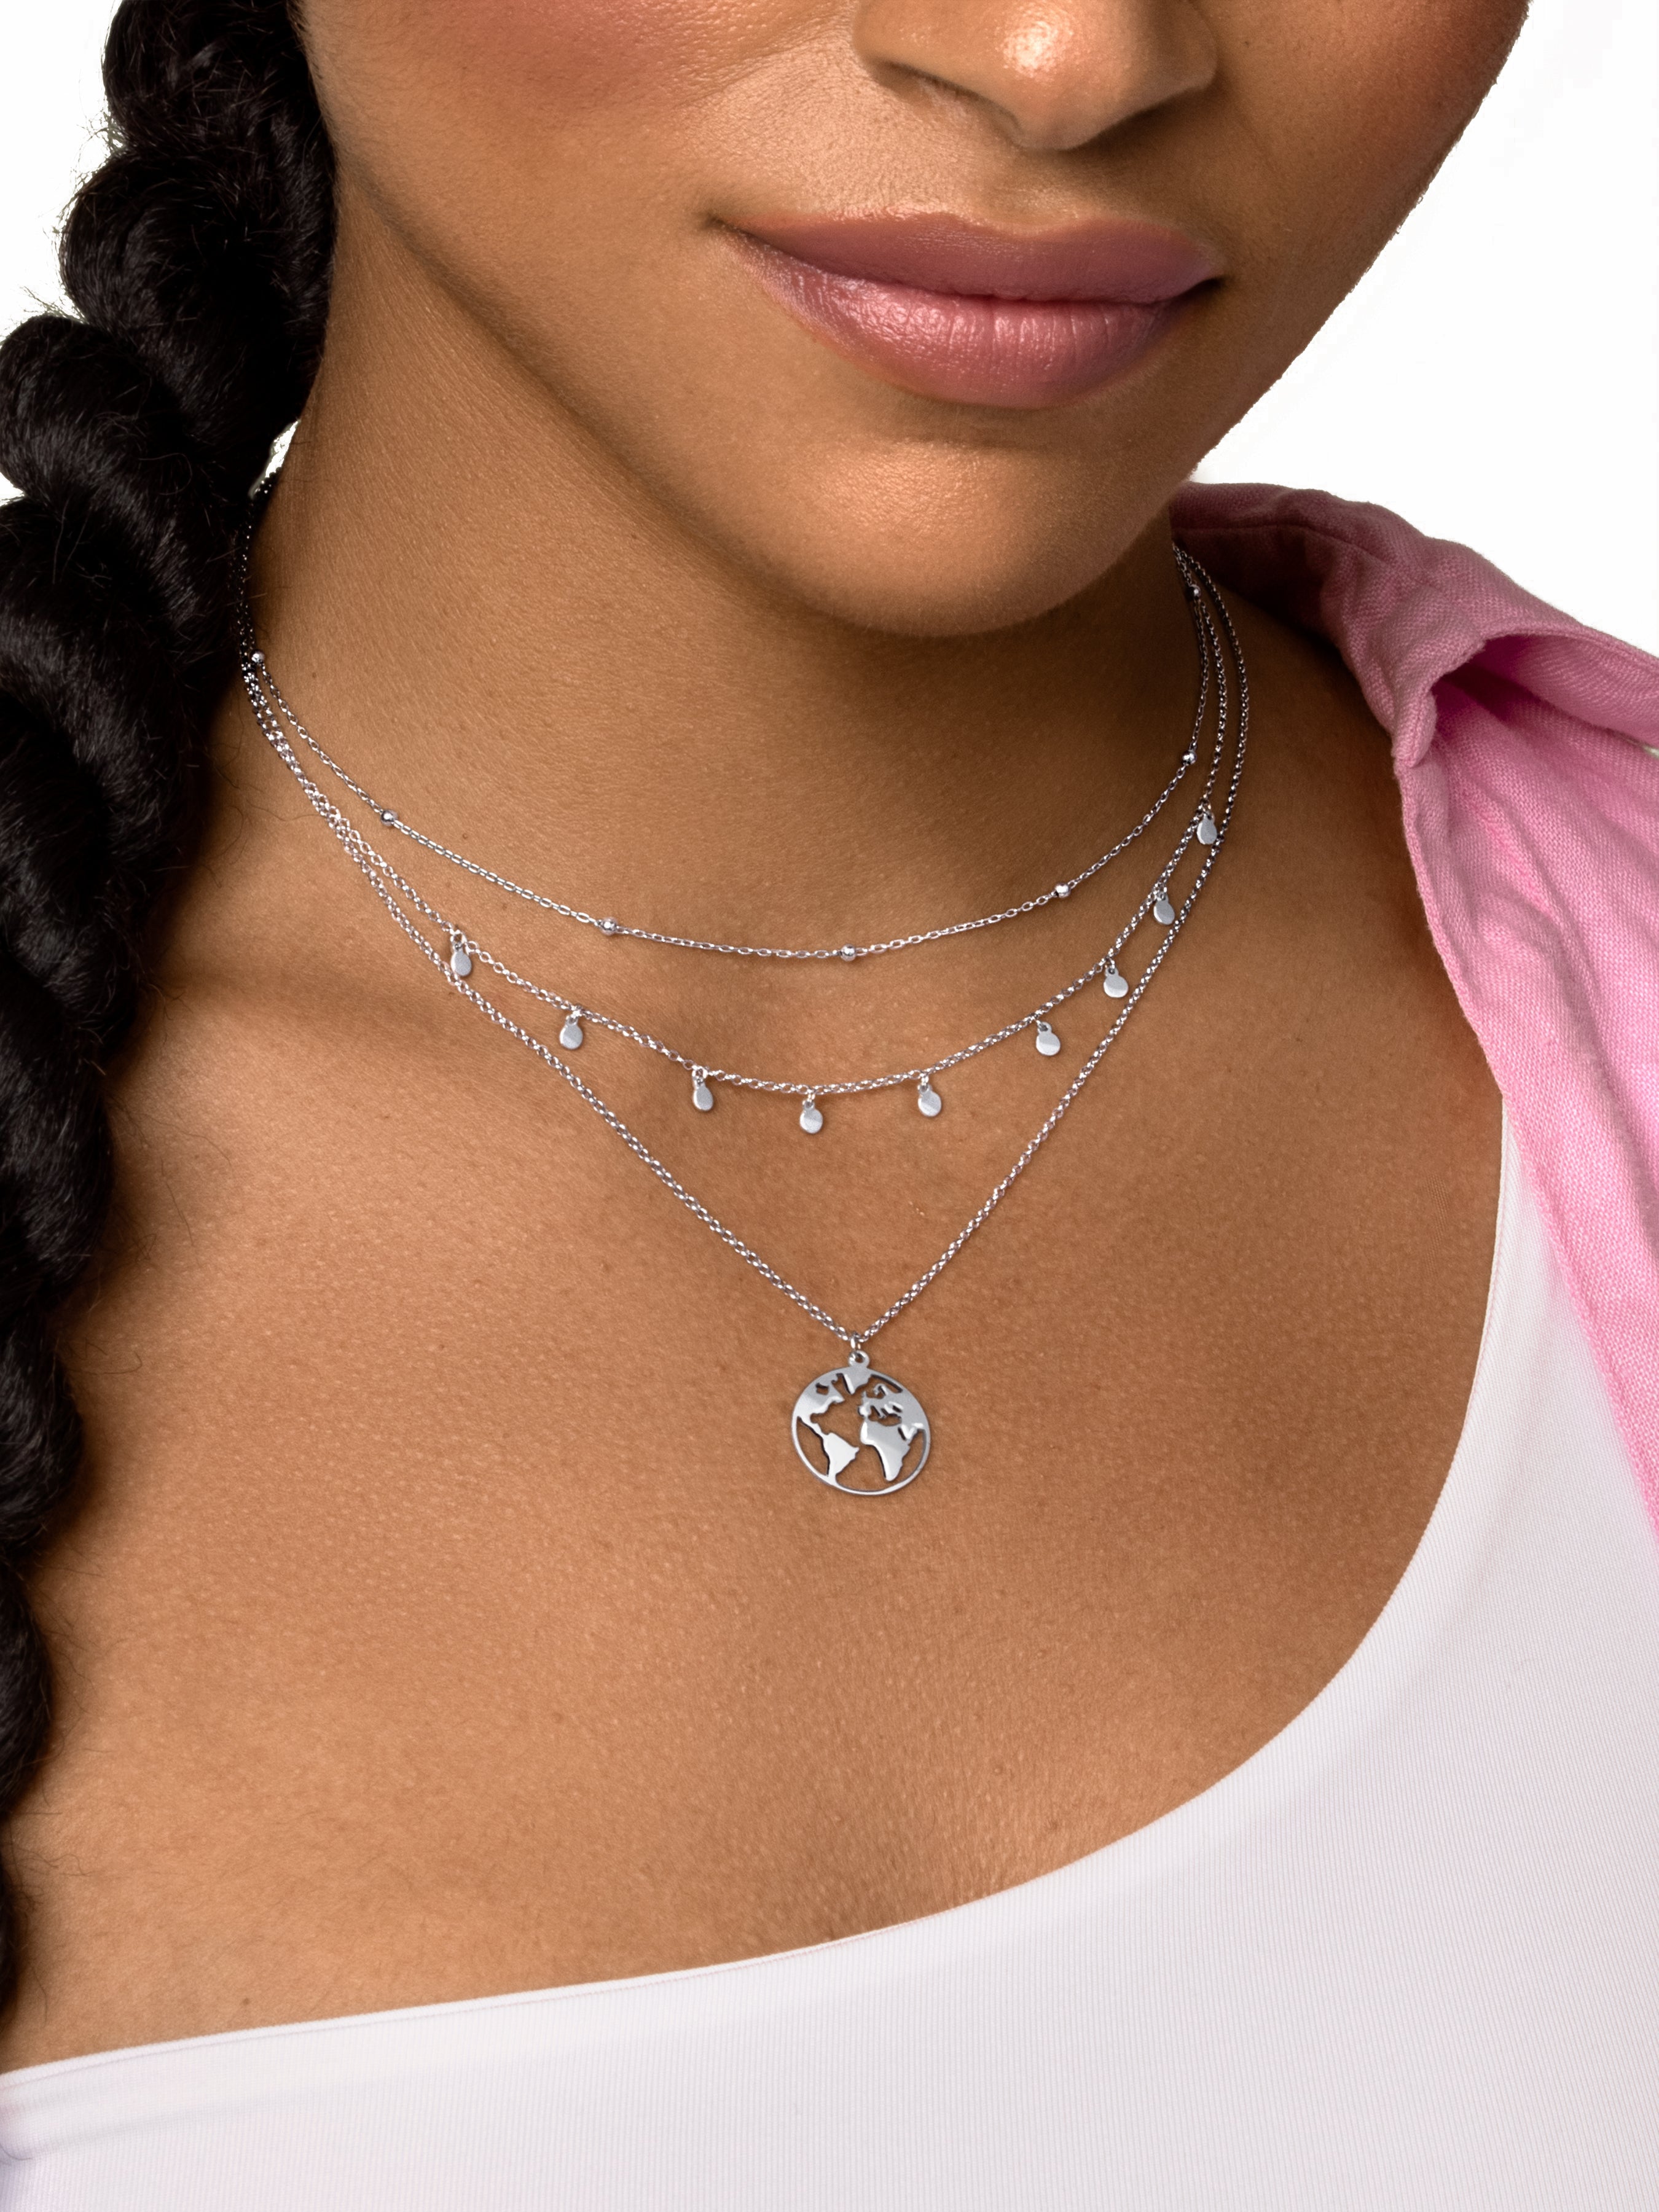 World Silver Necklace